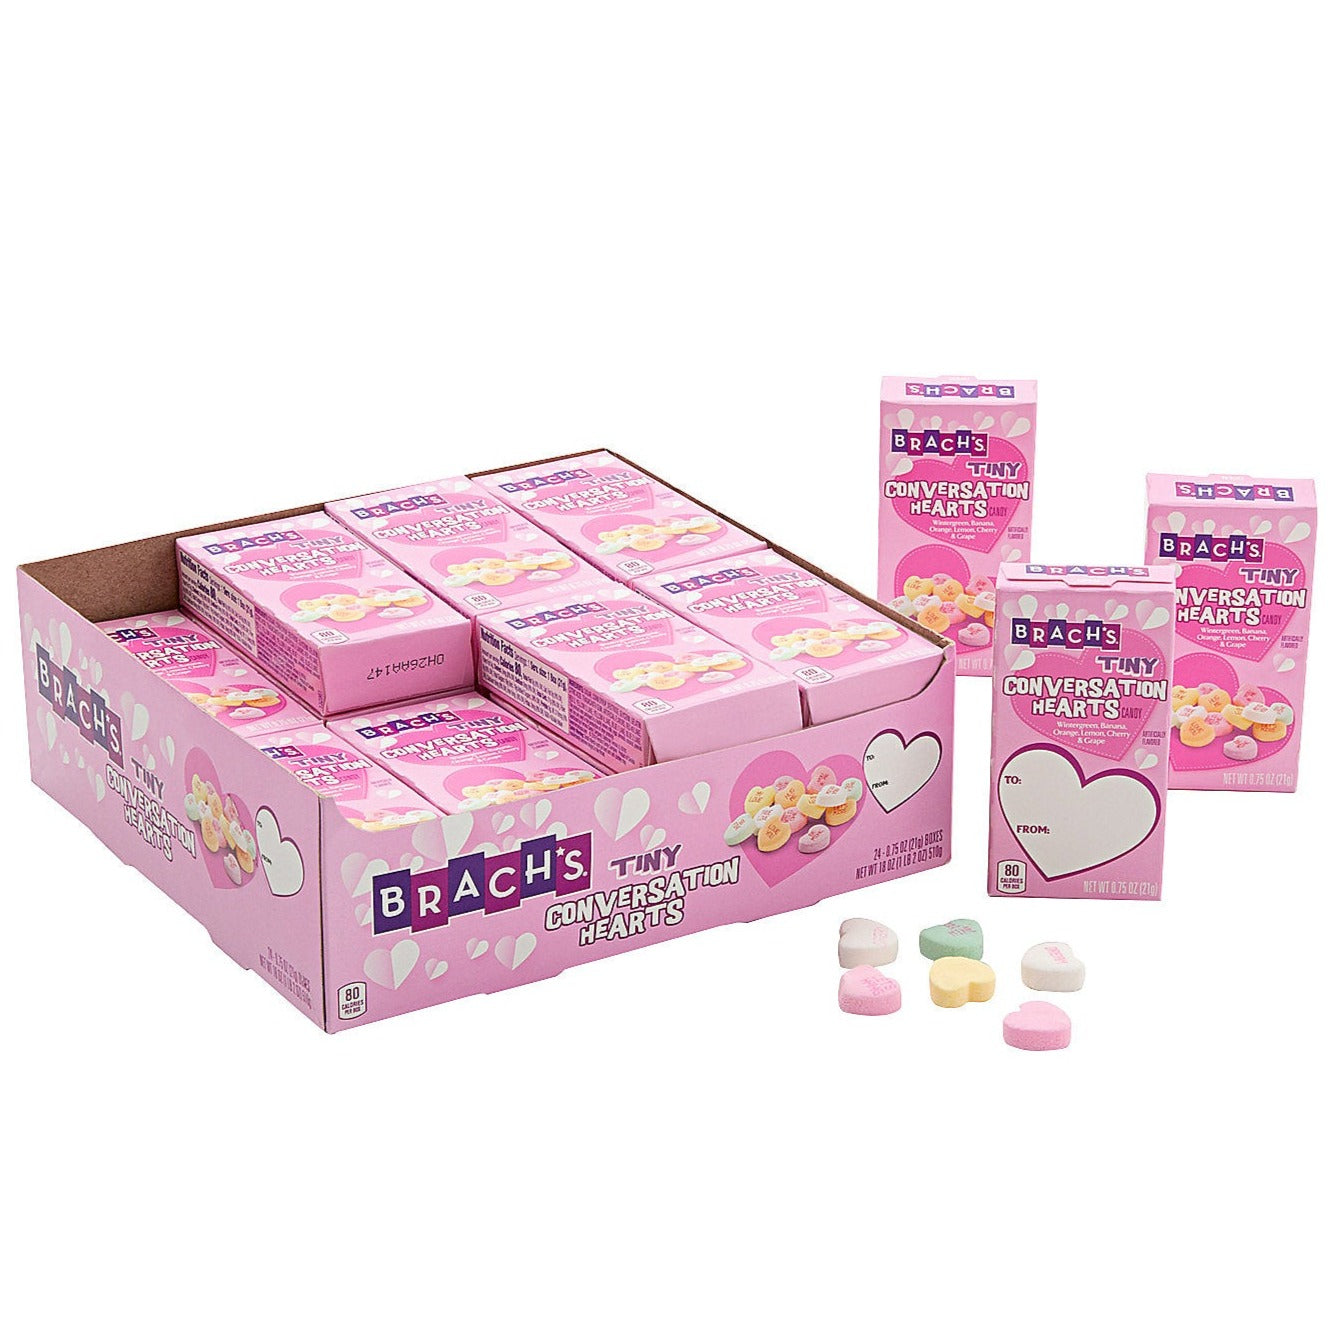 Brach's Valentine's Day Tiny Conversation Hearts Candy, Candy Gift Boxes